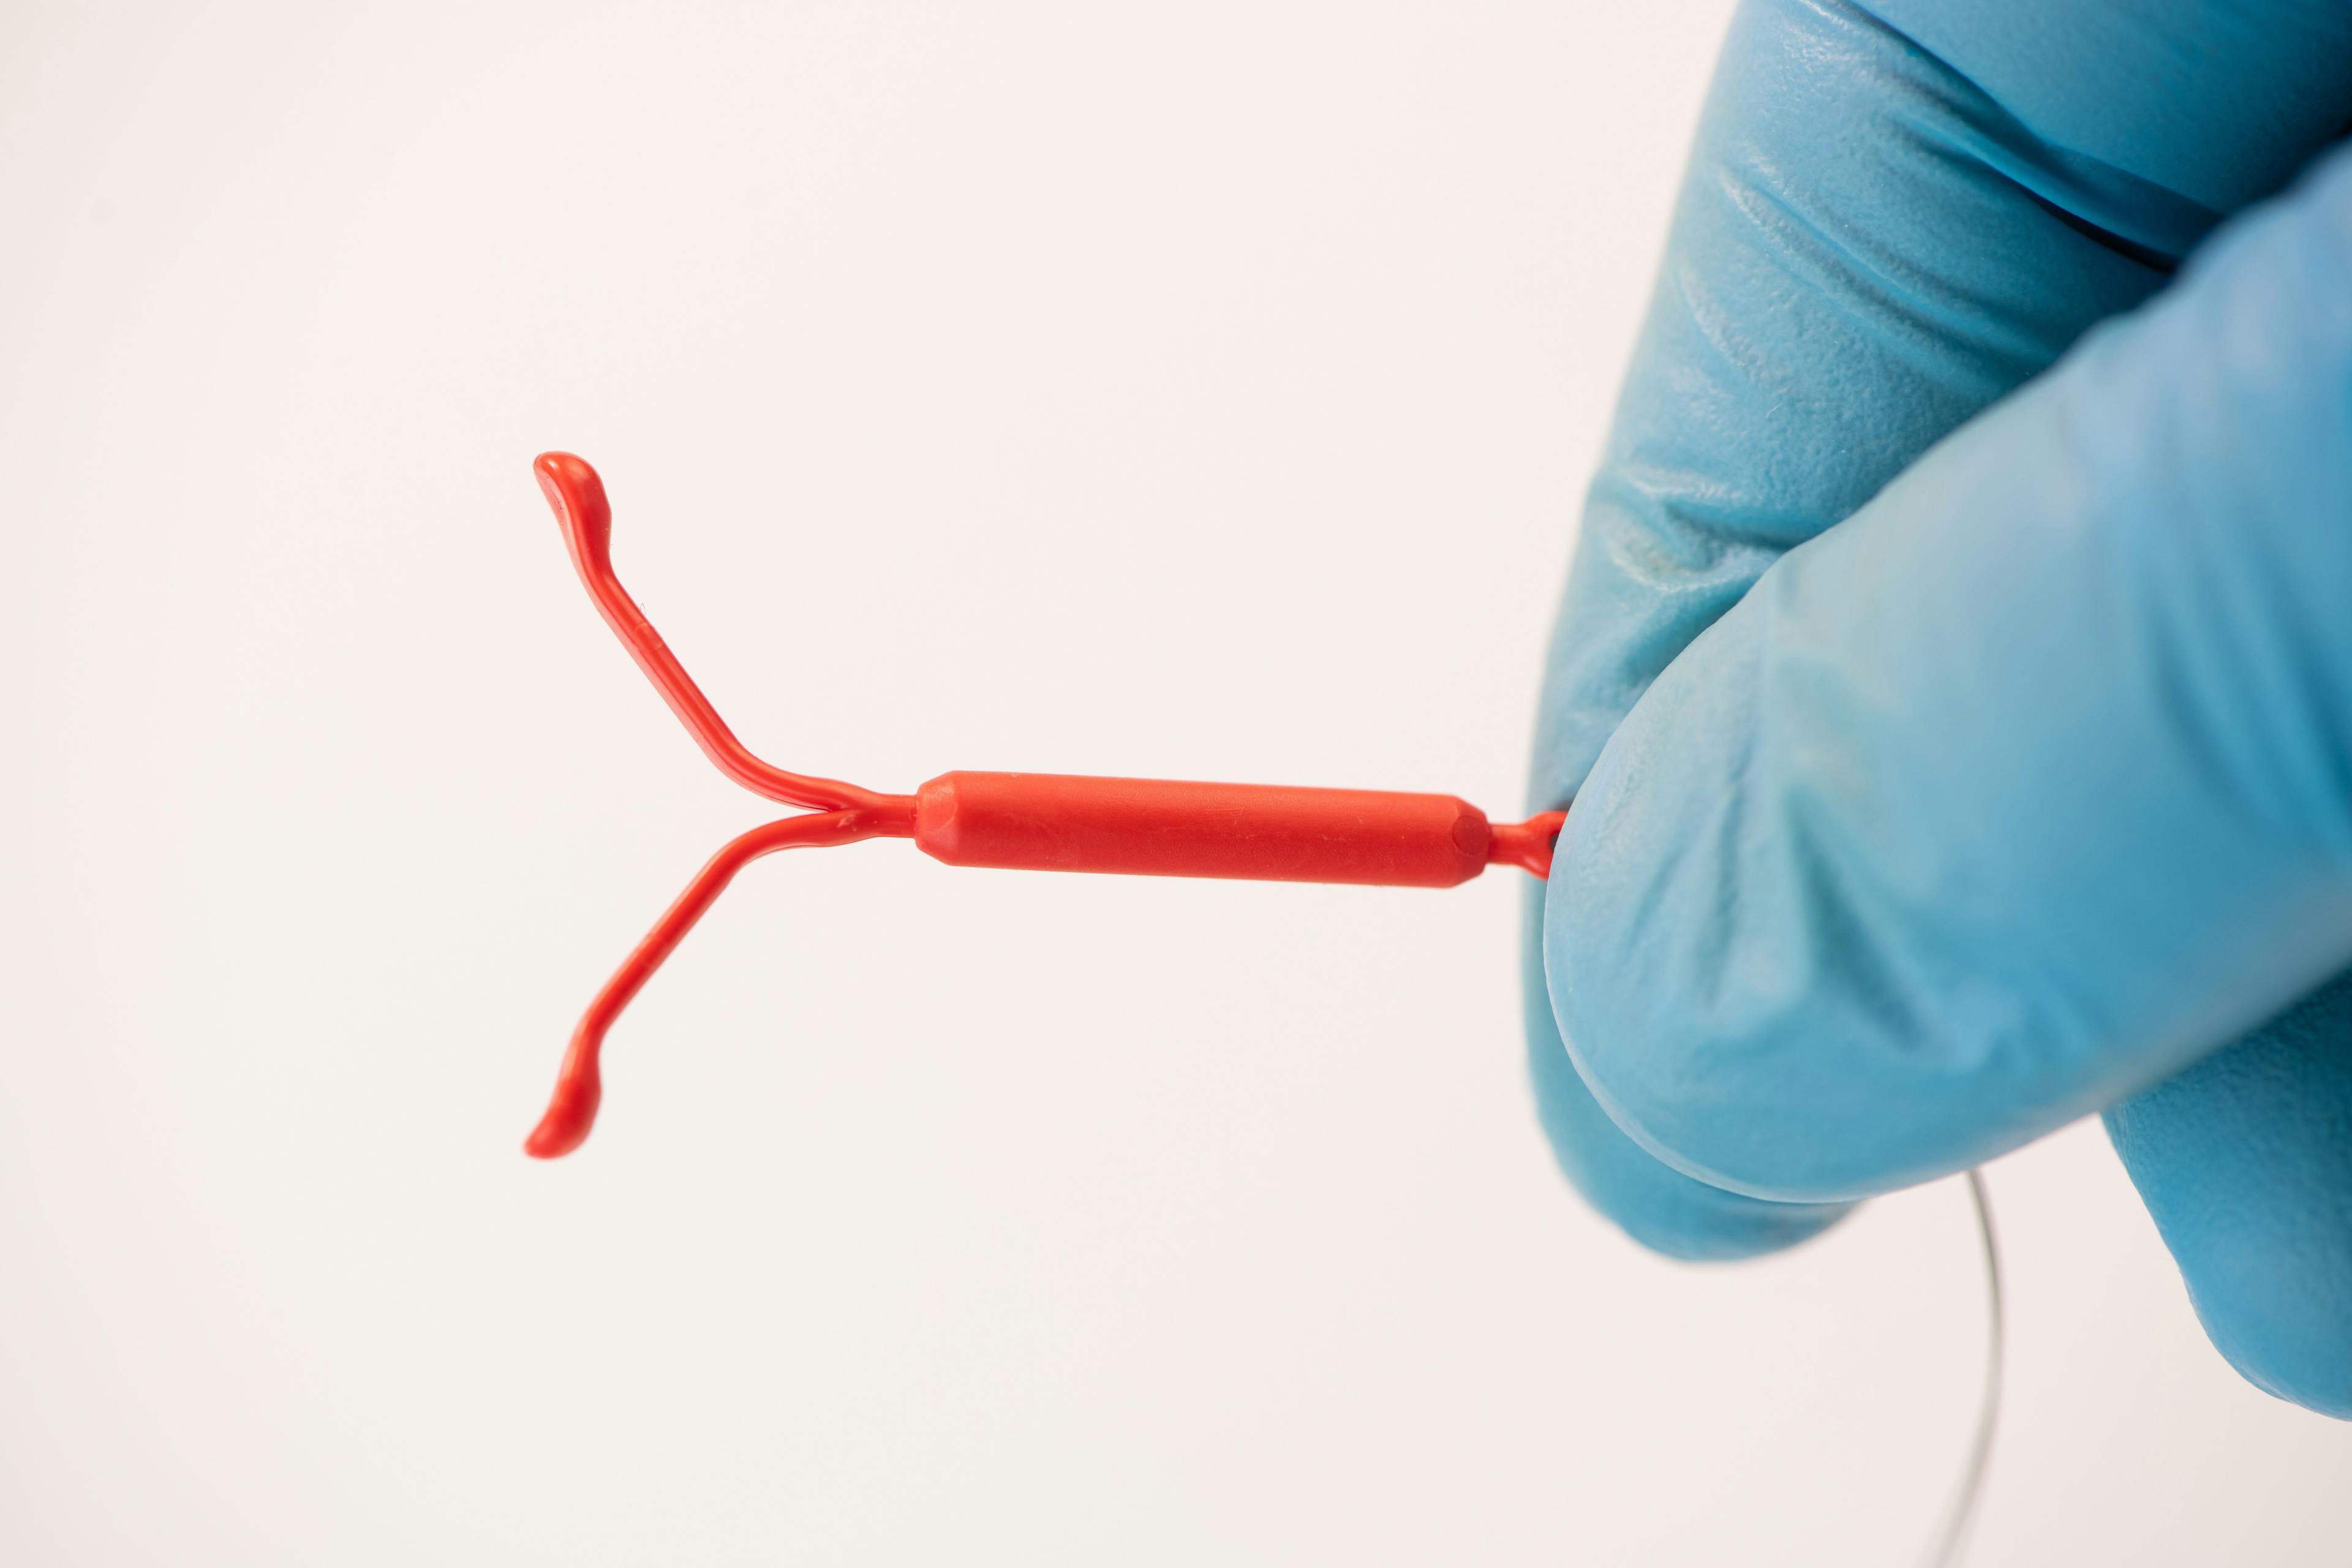 Study finds risk of pregnancy low prior to IUD placement following recent unprotected sex